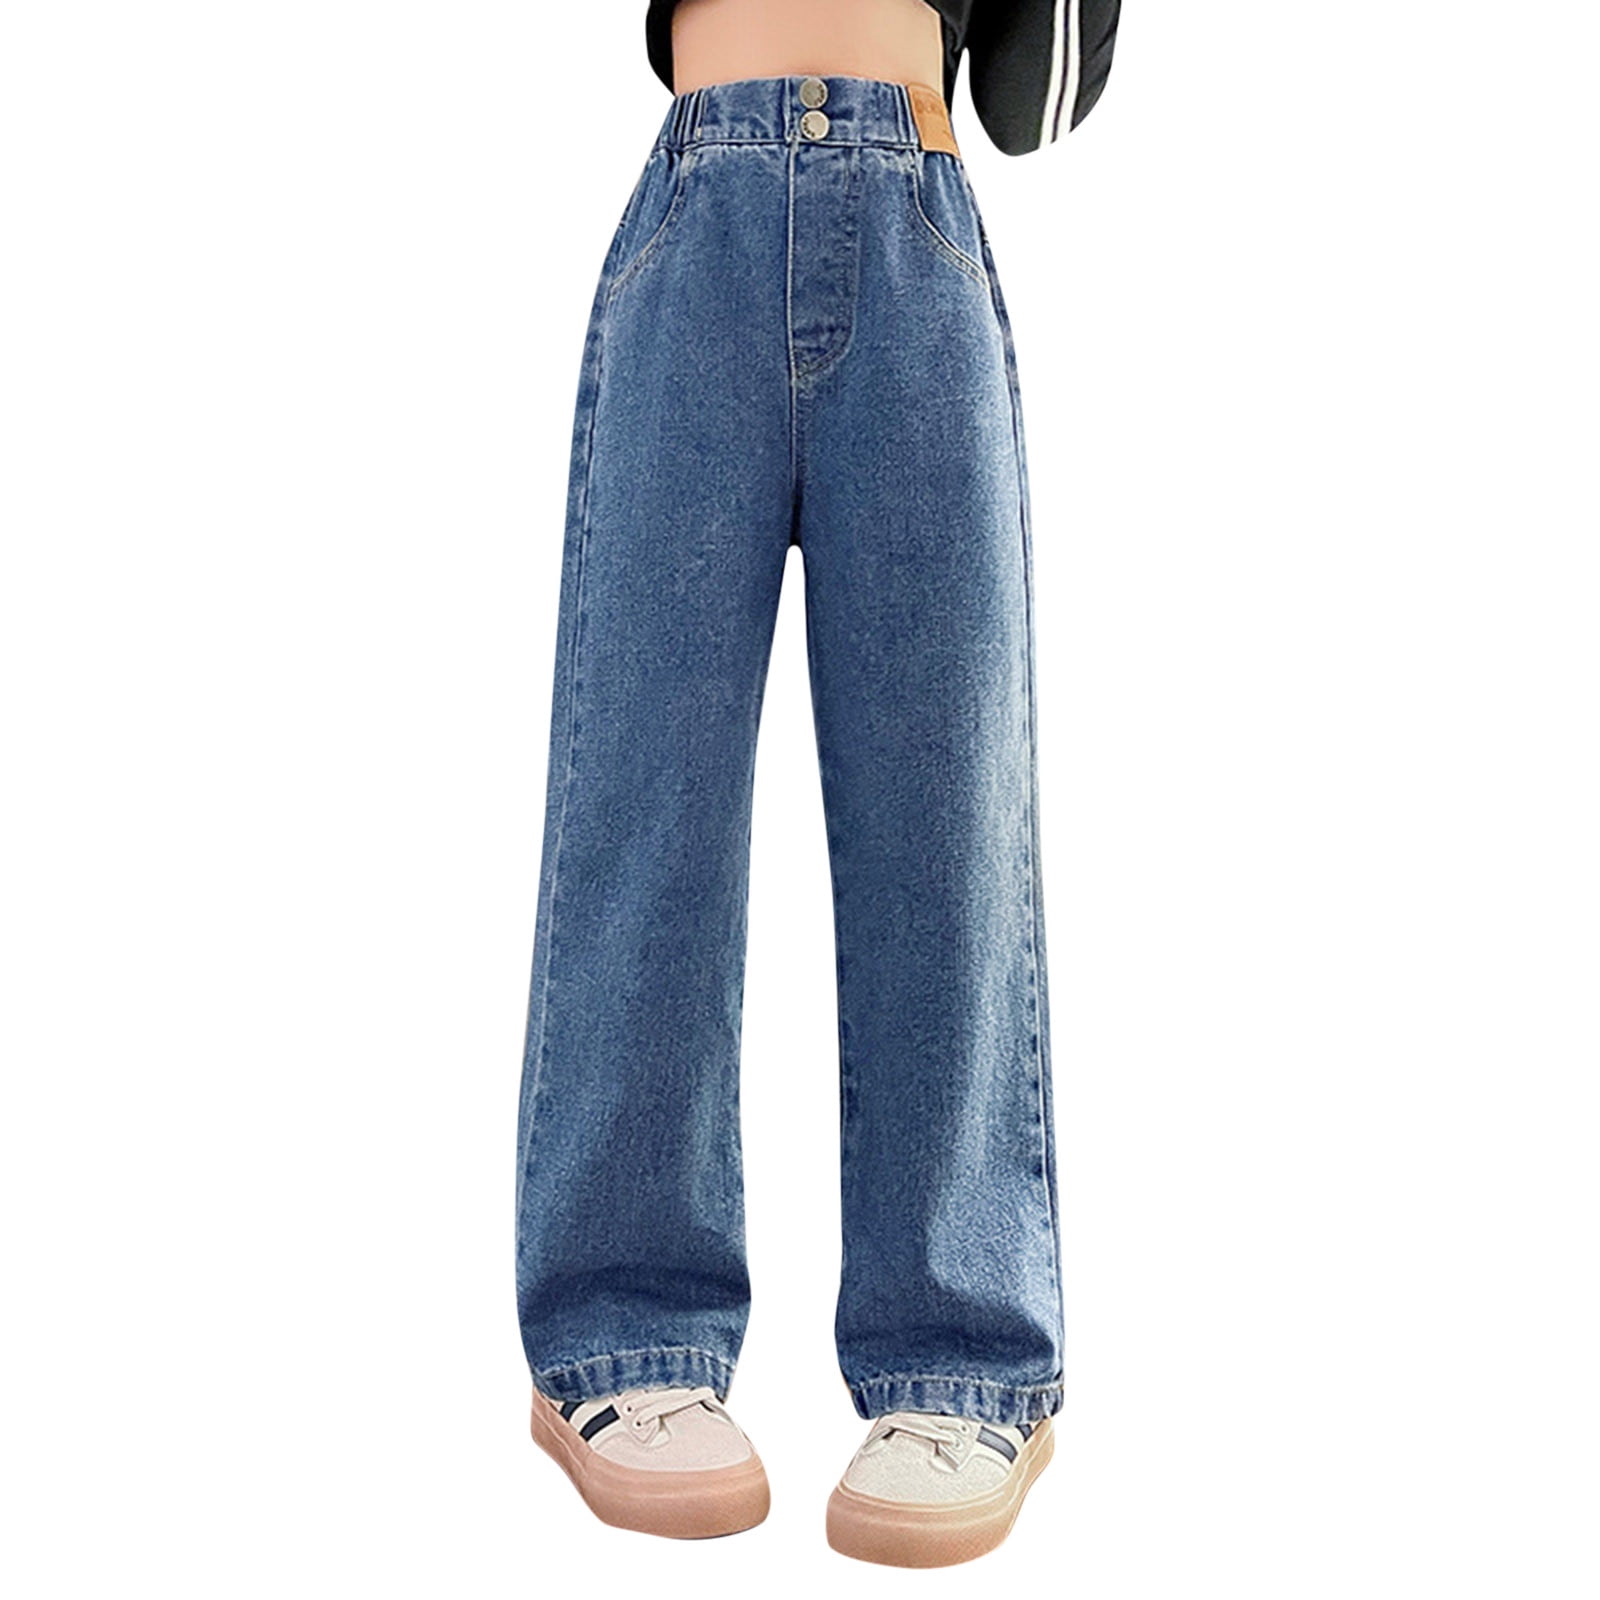 Kids Jeans Girl Wide Leg Pants Girls Jeans Elastic Waist For Girls Spring  Autumn Casual Clothes Pants 5 7 9 11 13 YfXL# From Walmarts, $24.84